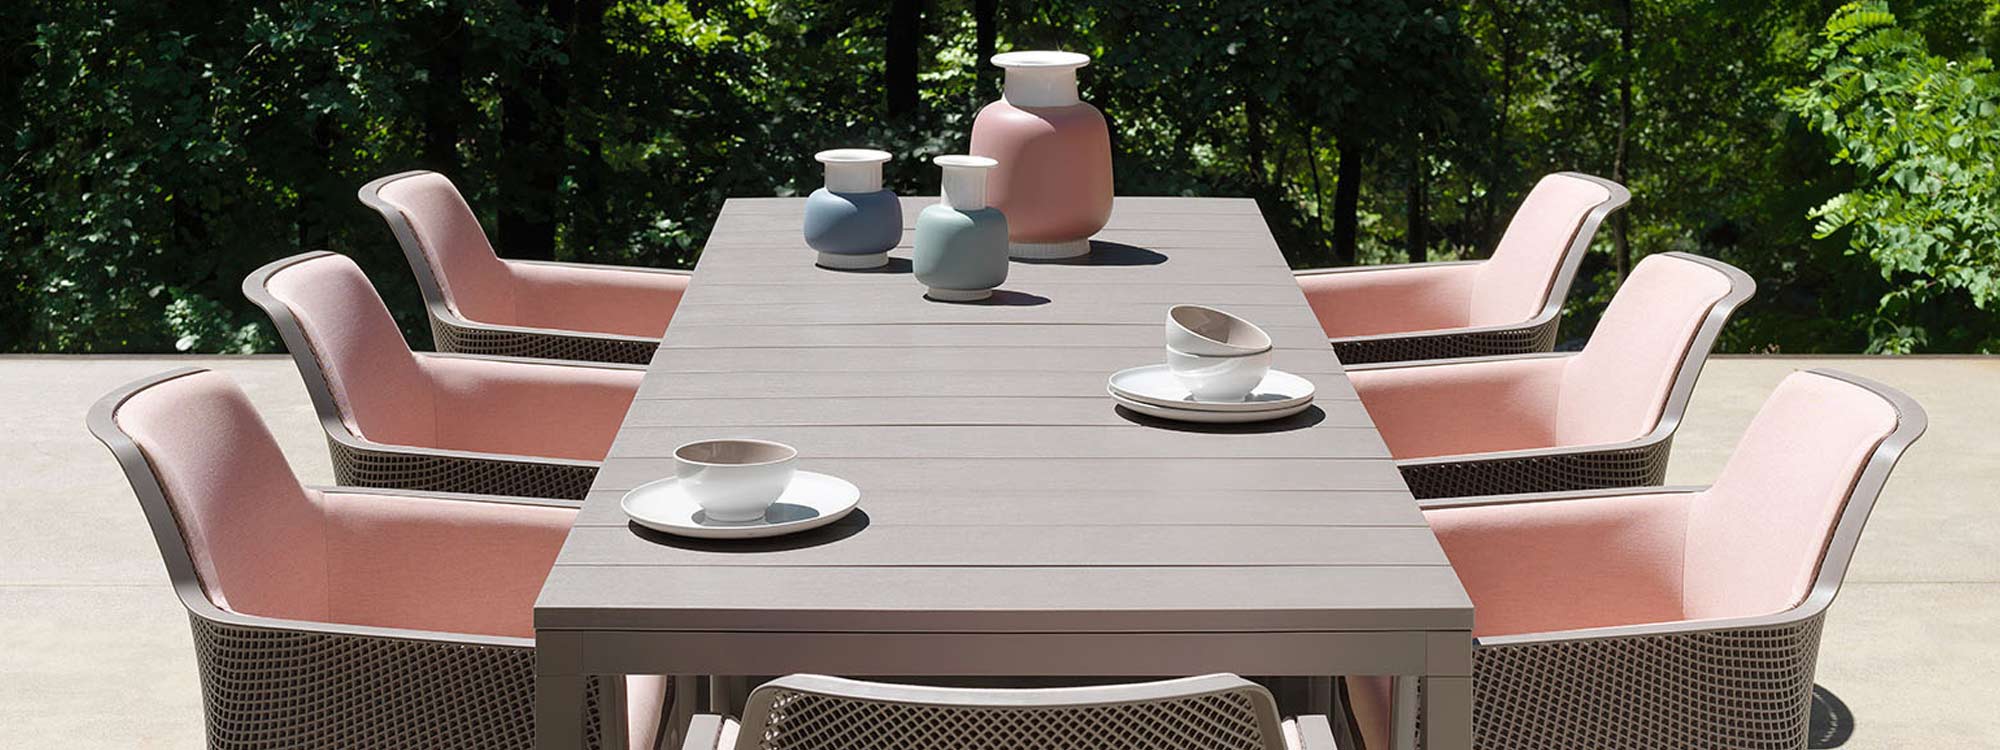 Image of taupe coloured Net garden chairs and Rio modern garden table by Nardi